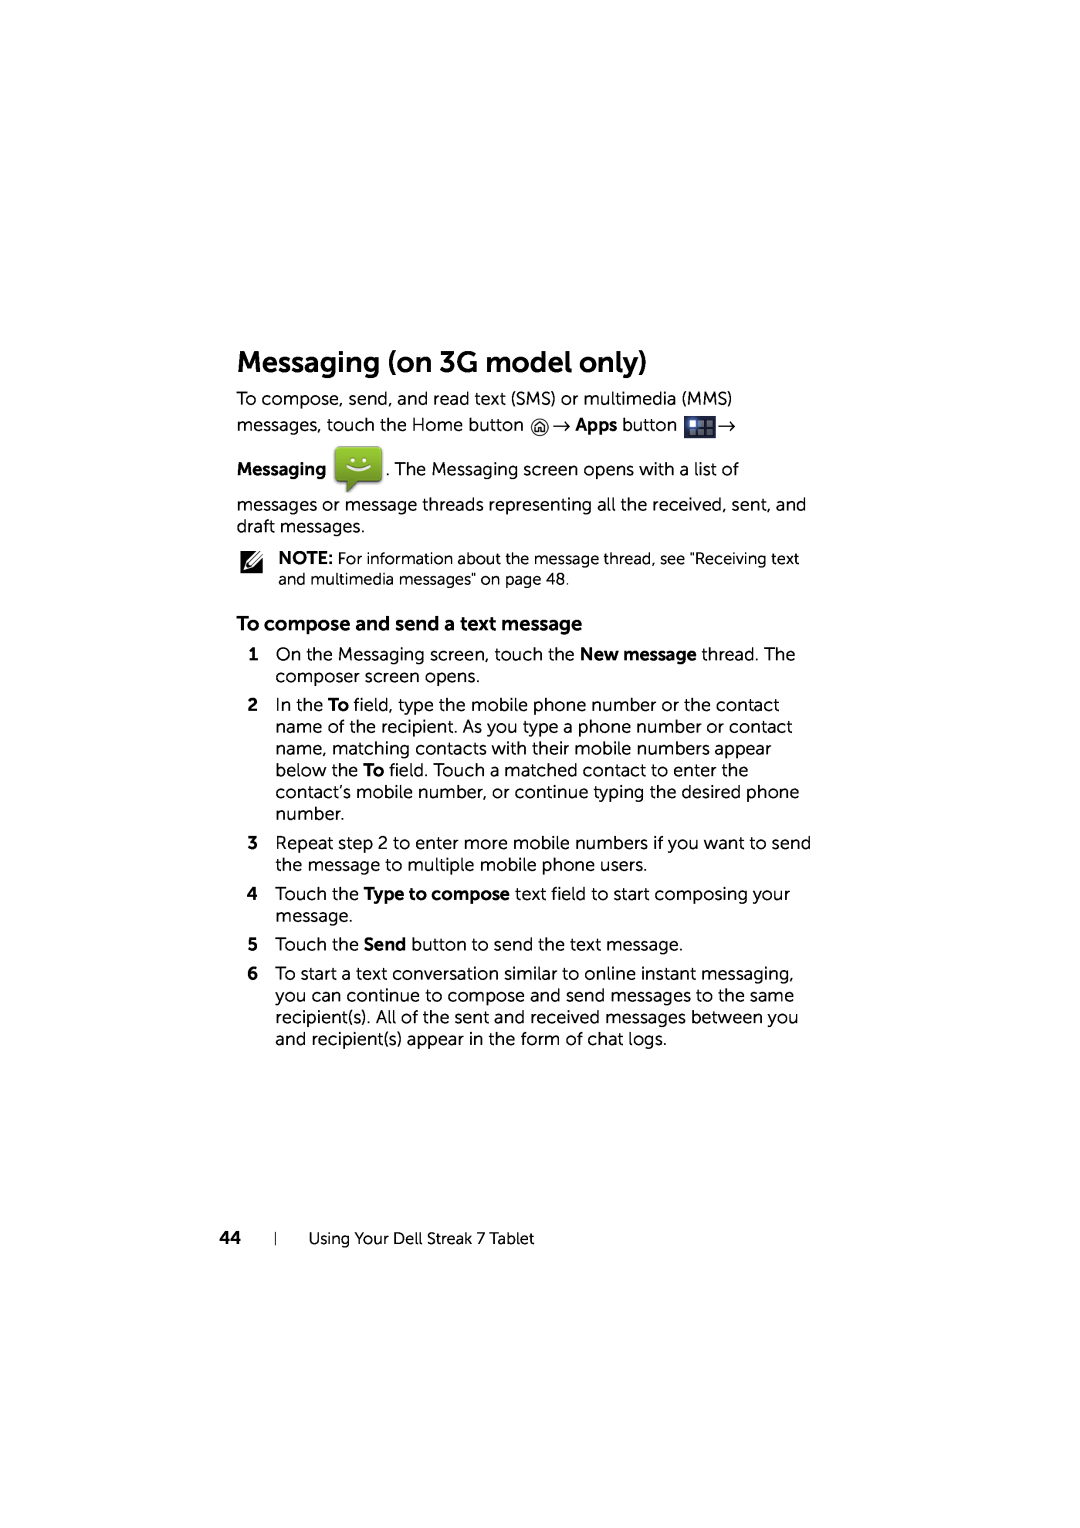 Dell LG7_bk0 user manual Messaging on 3G model only, To compose and send a text message 